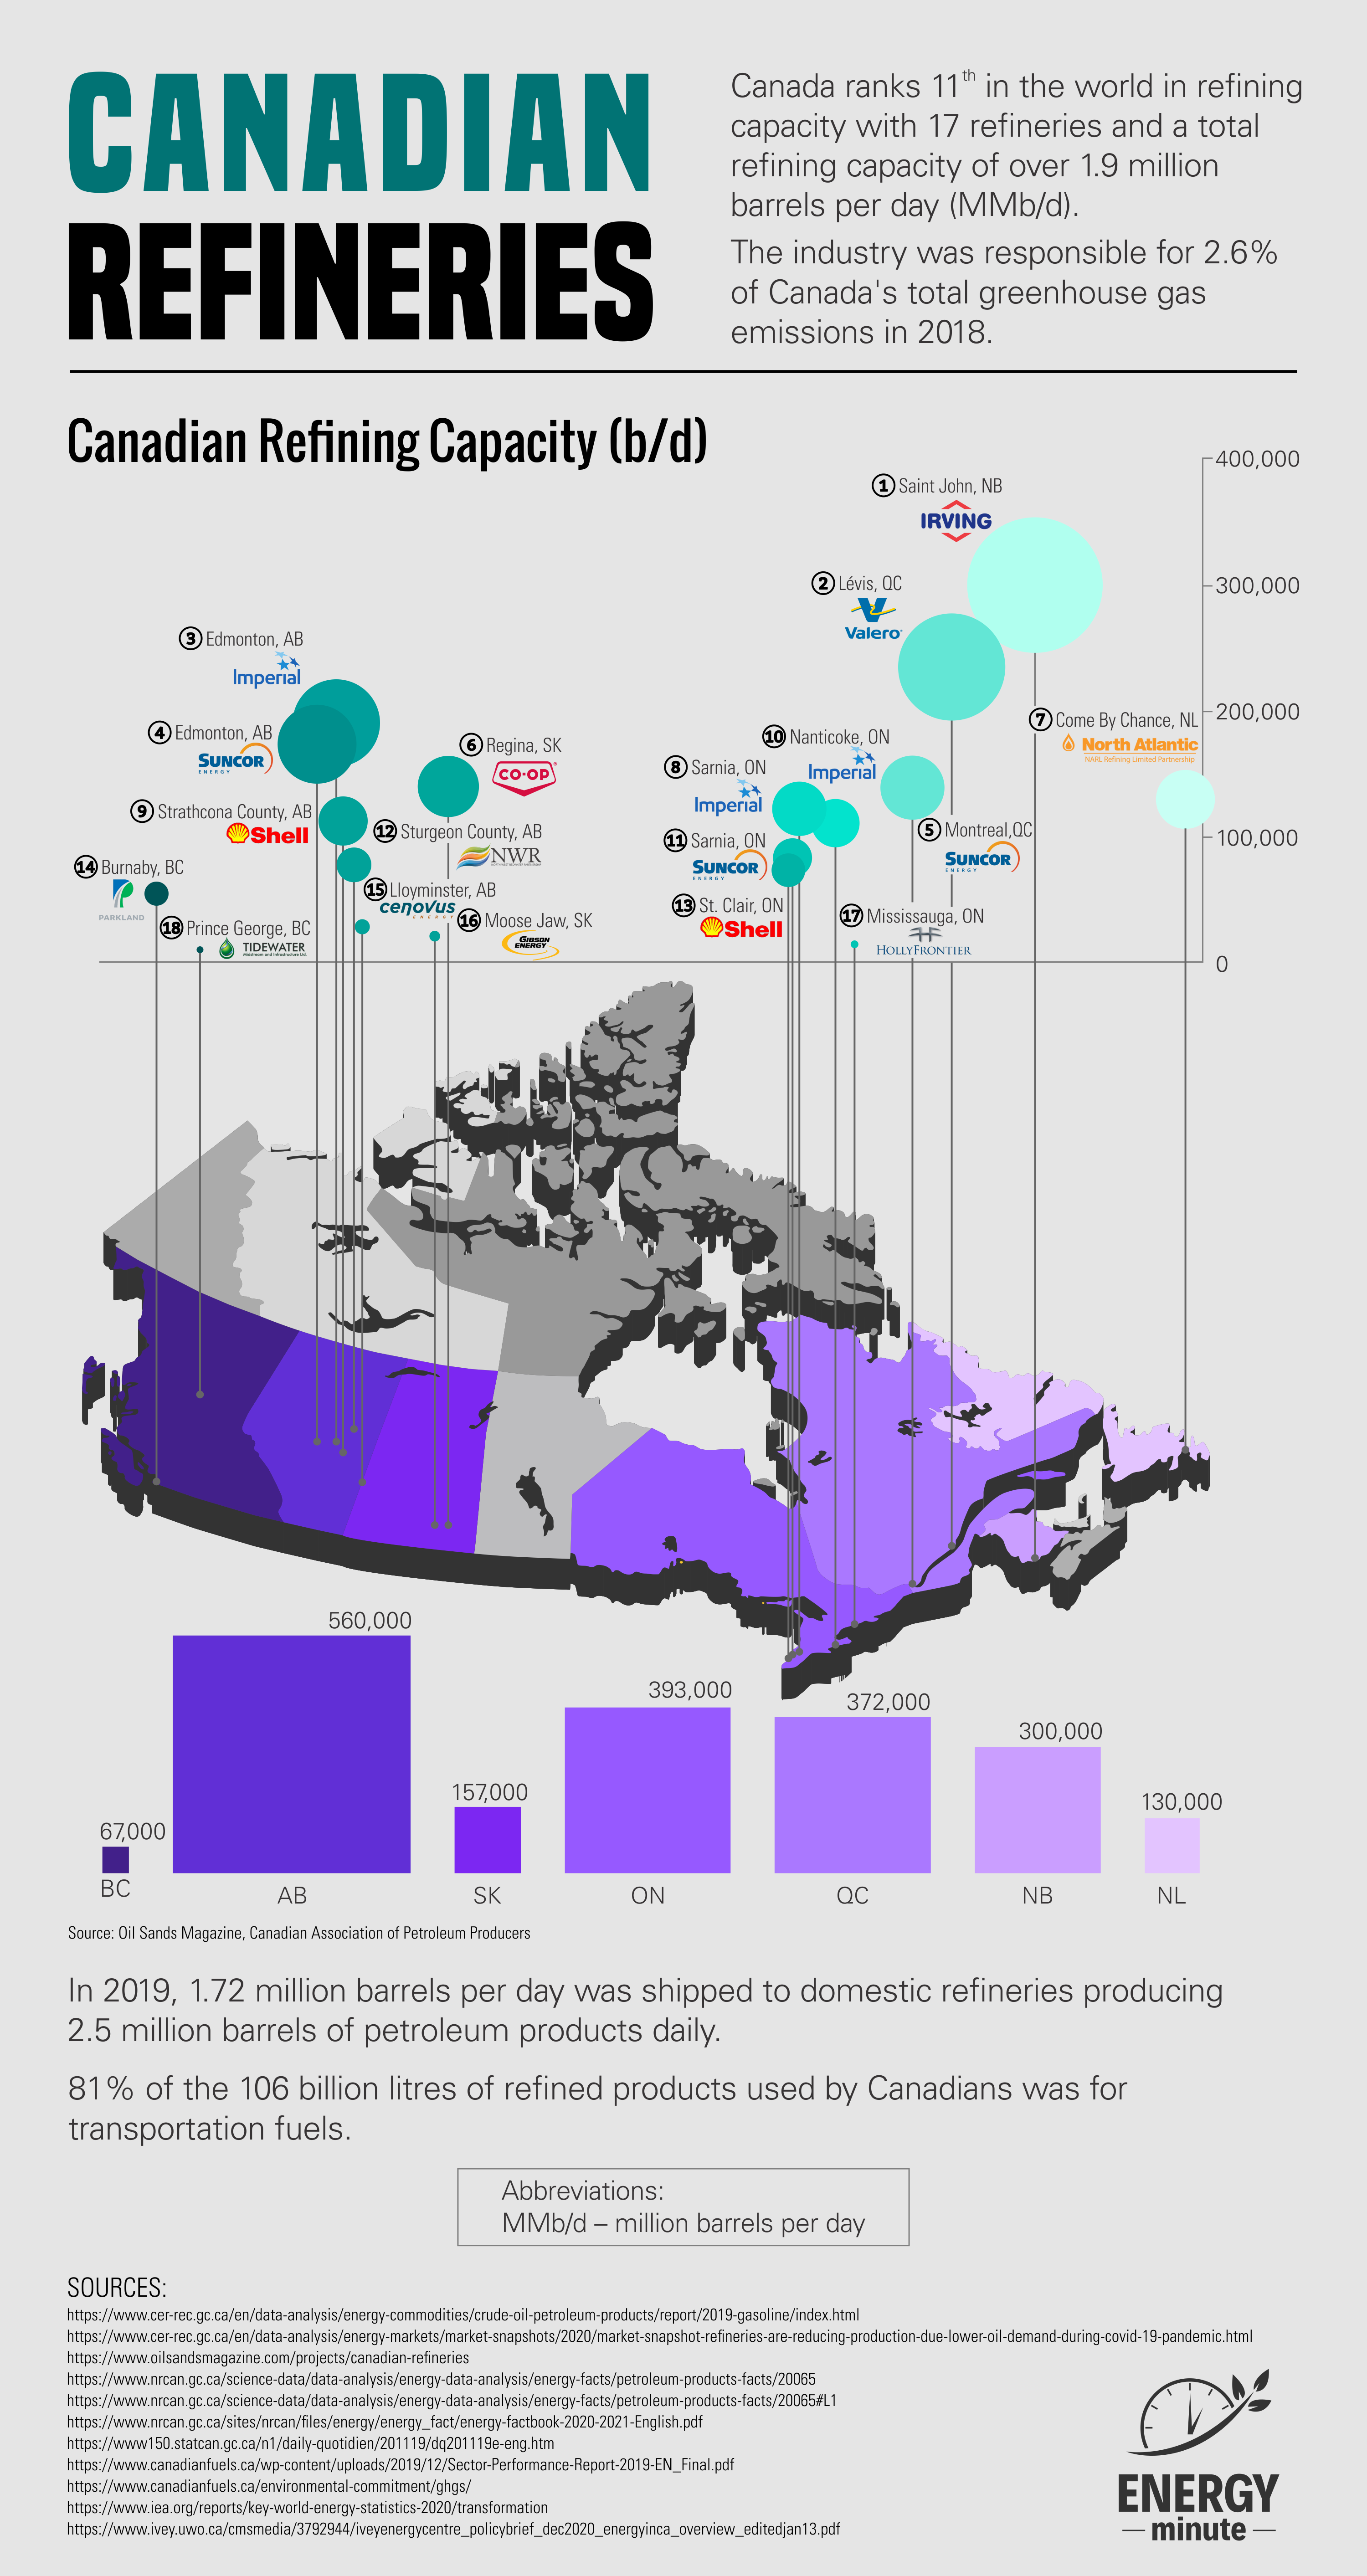 Canadian Refineries from Coast to Coast